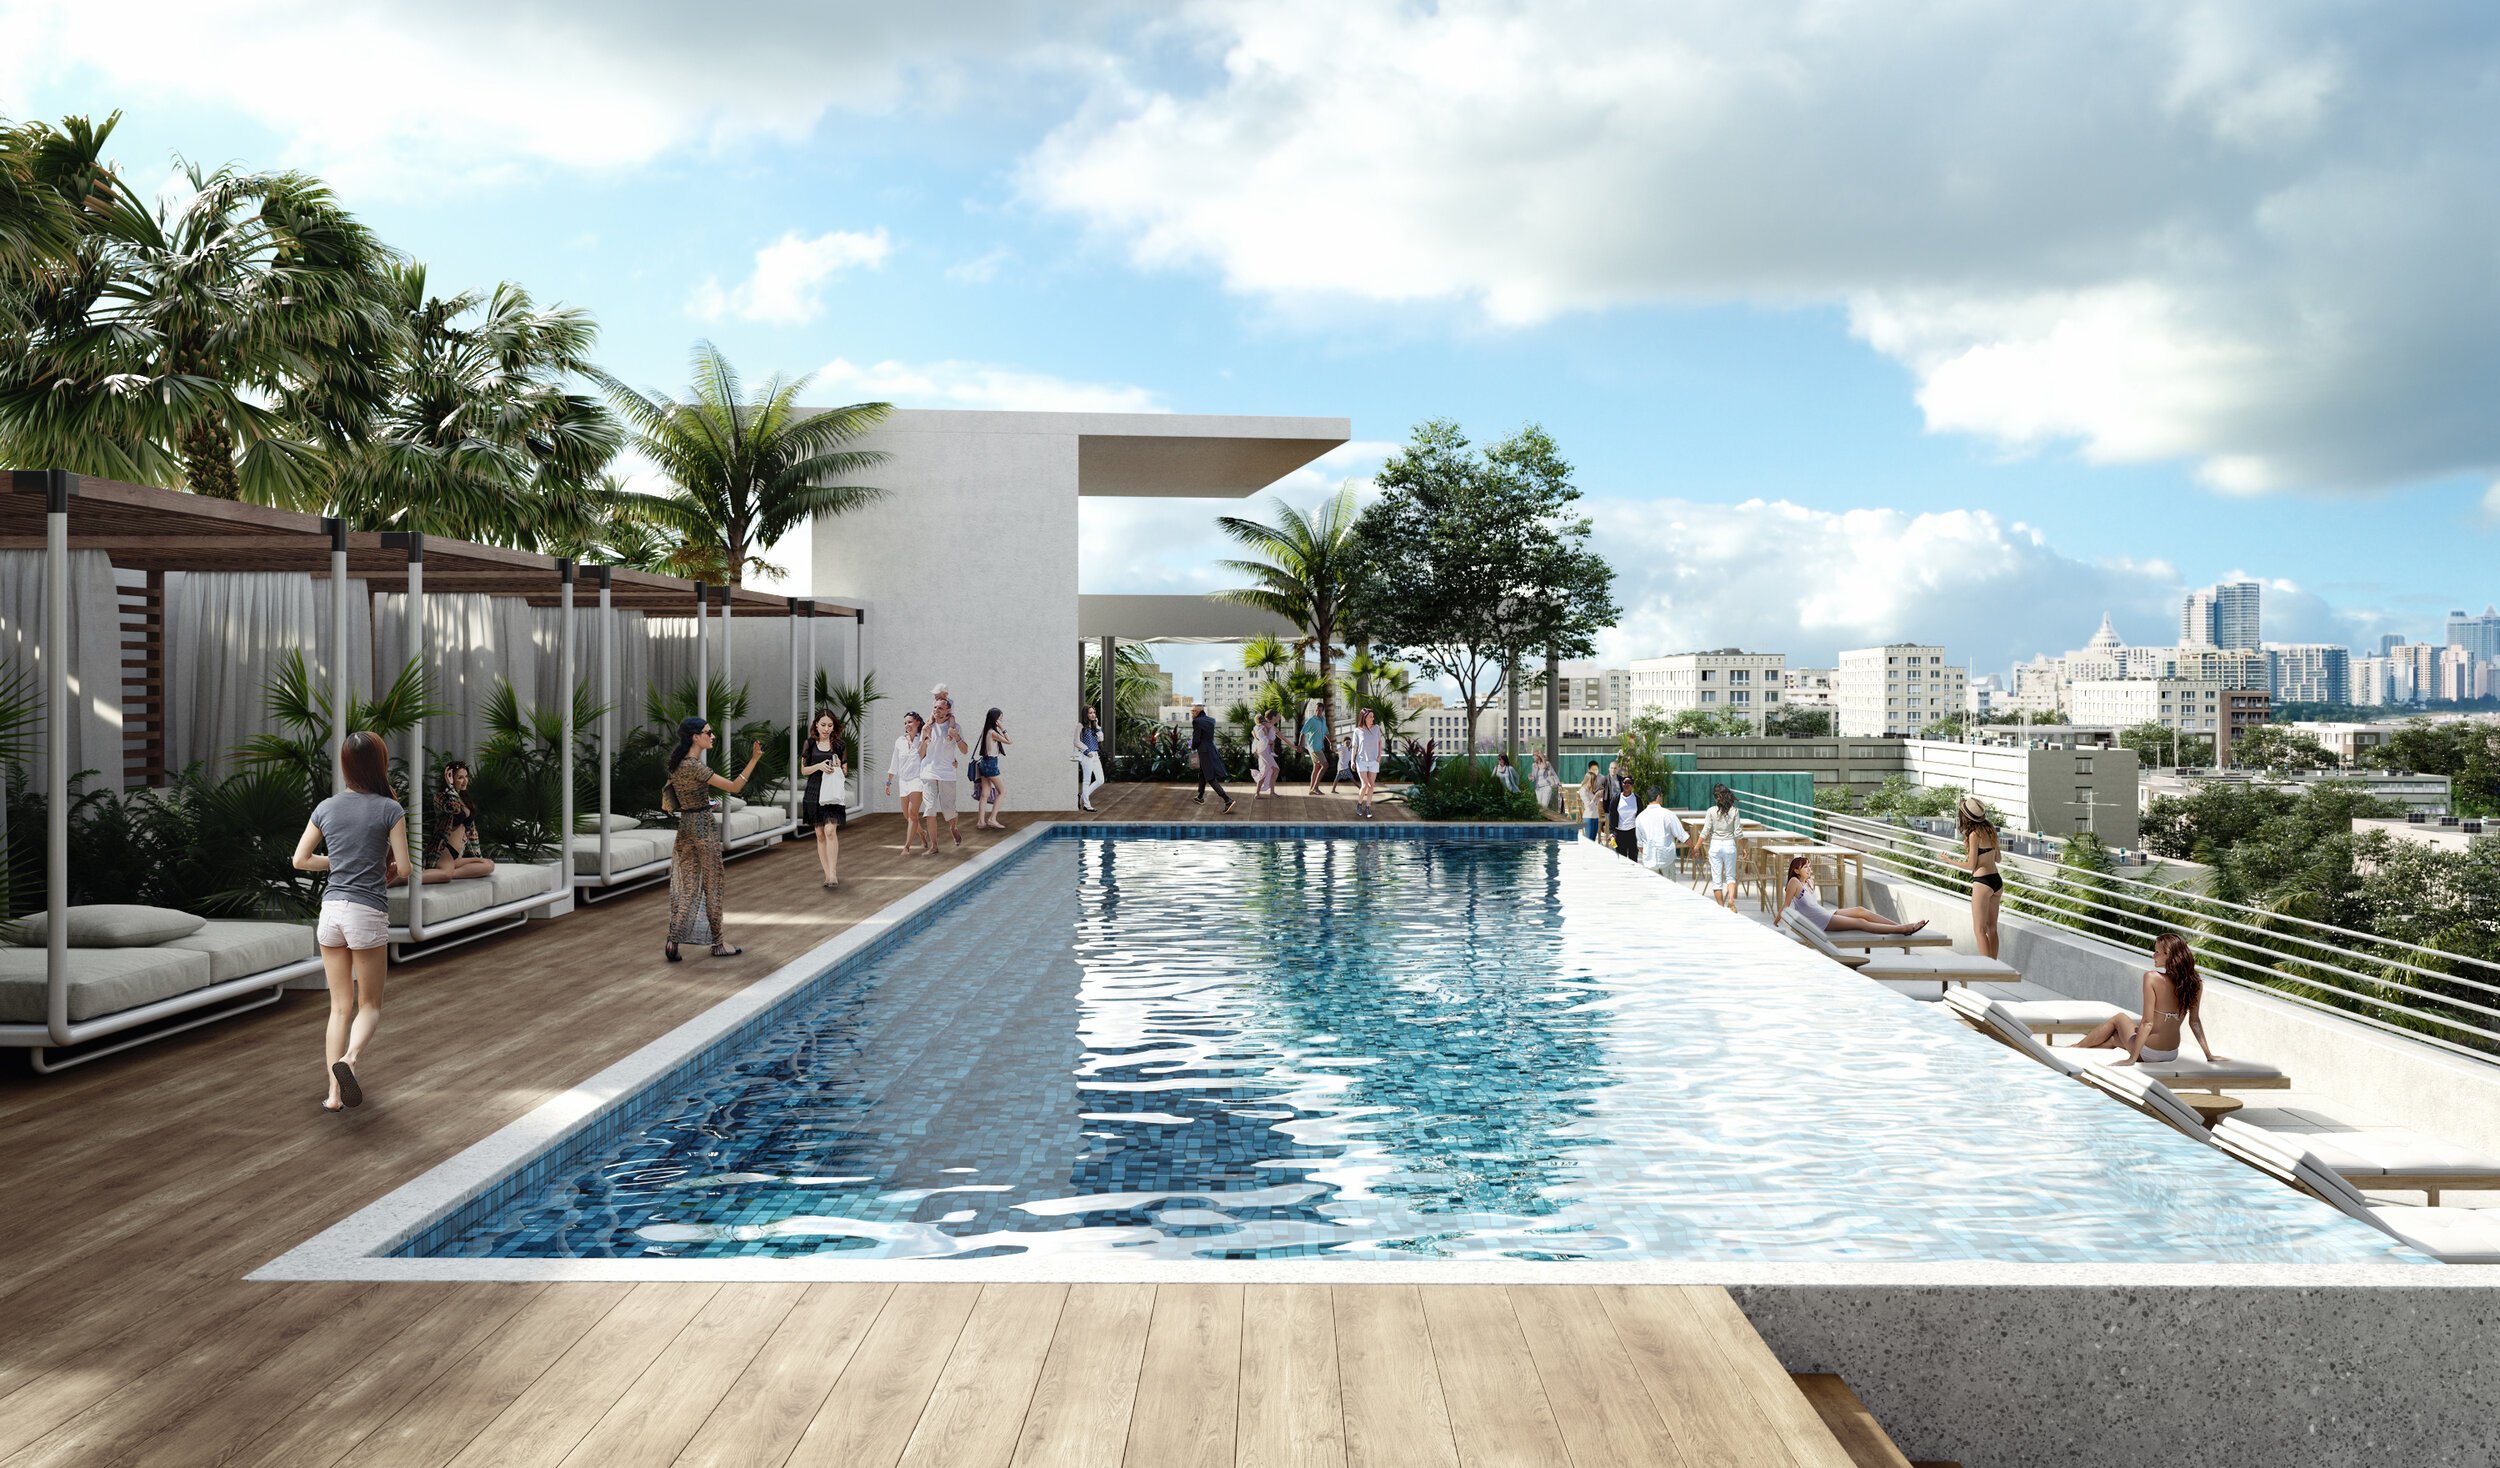 Location Ventures Announces Sellout of URBIN Miami Beach Mixed-Use Condo, Co-Working Lifestyle Project4.jpeg